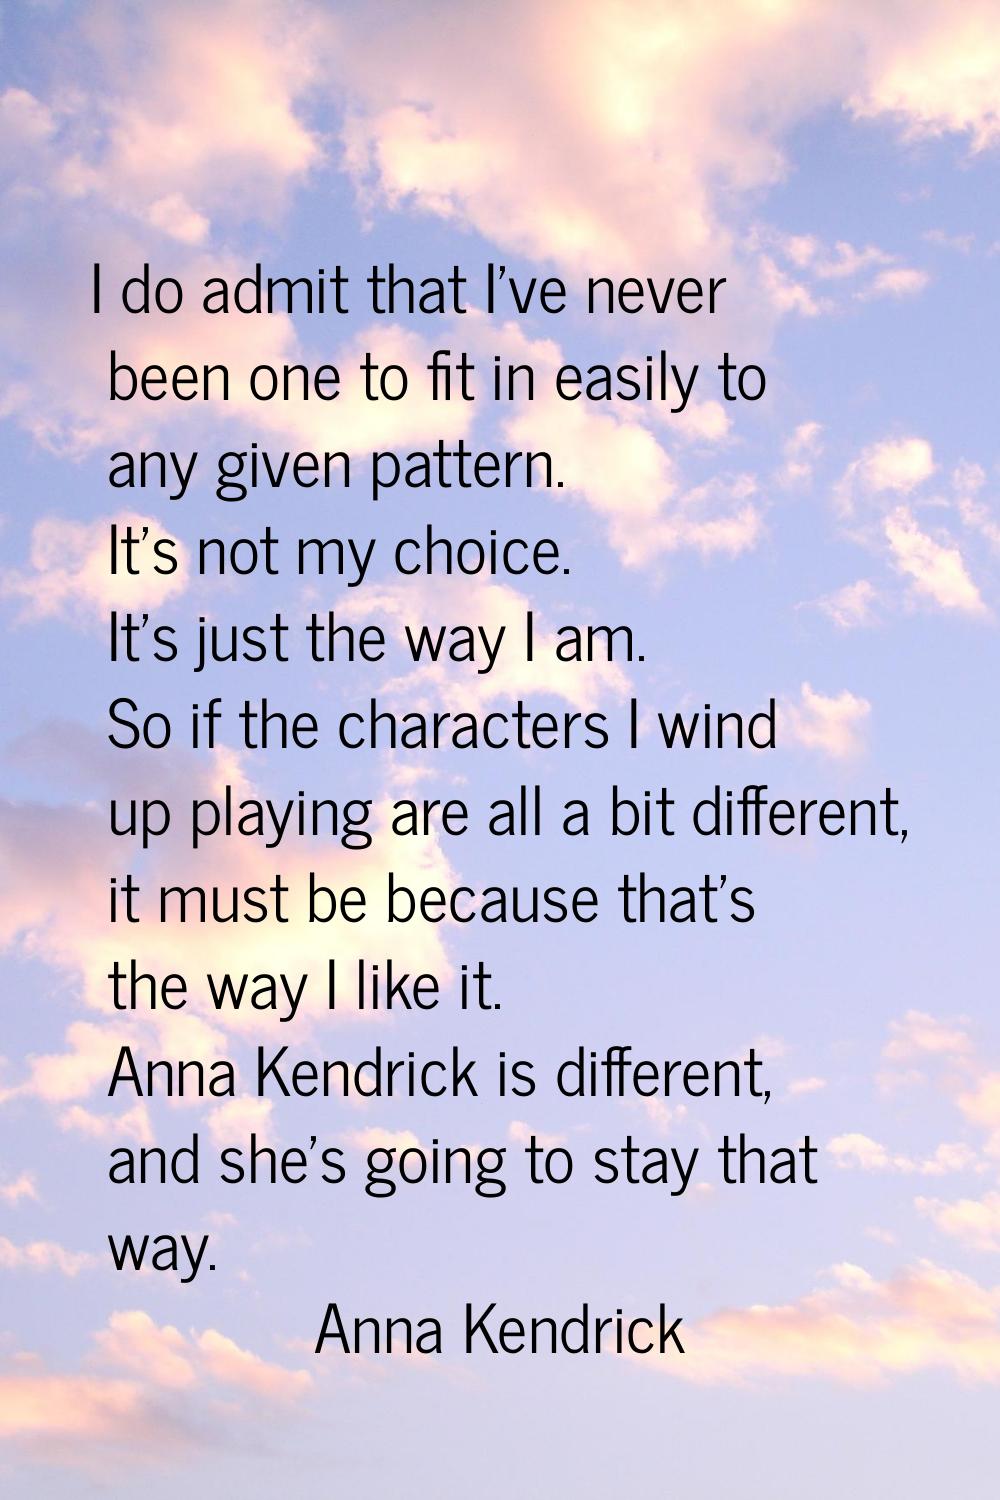 I do admit that I've never been one to fit in easily to any given pattern. It's not my choice. It's